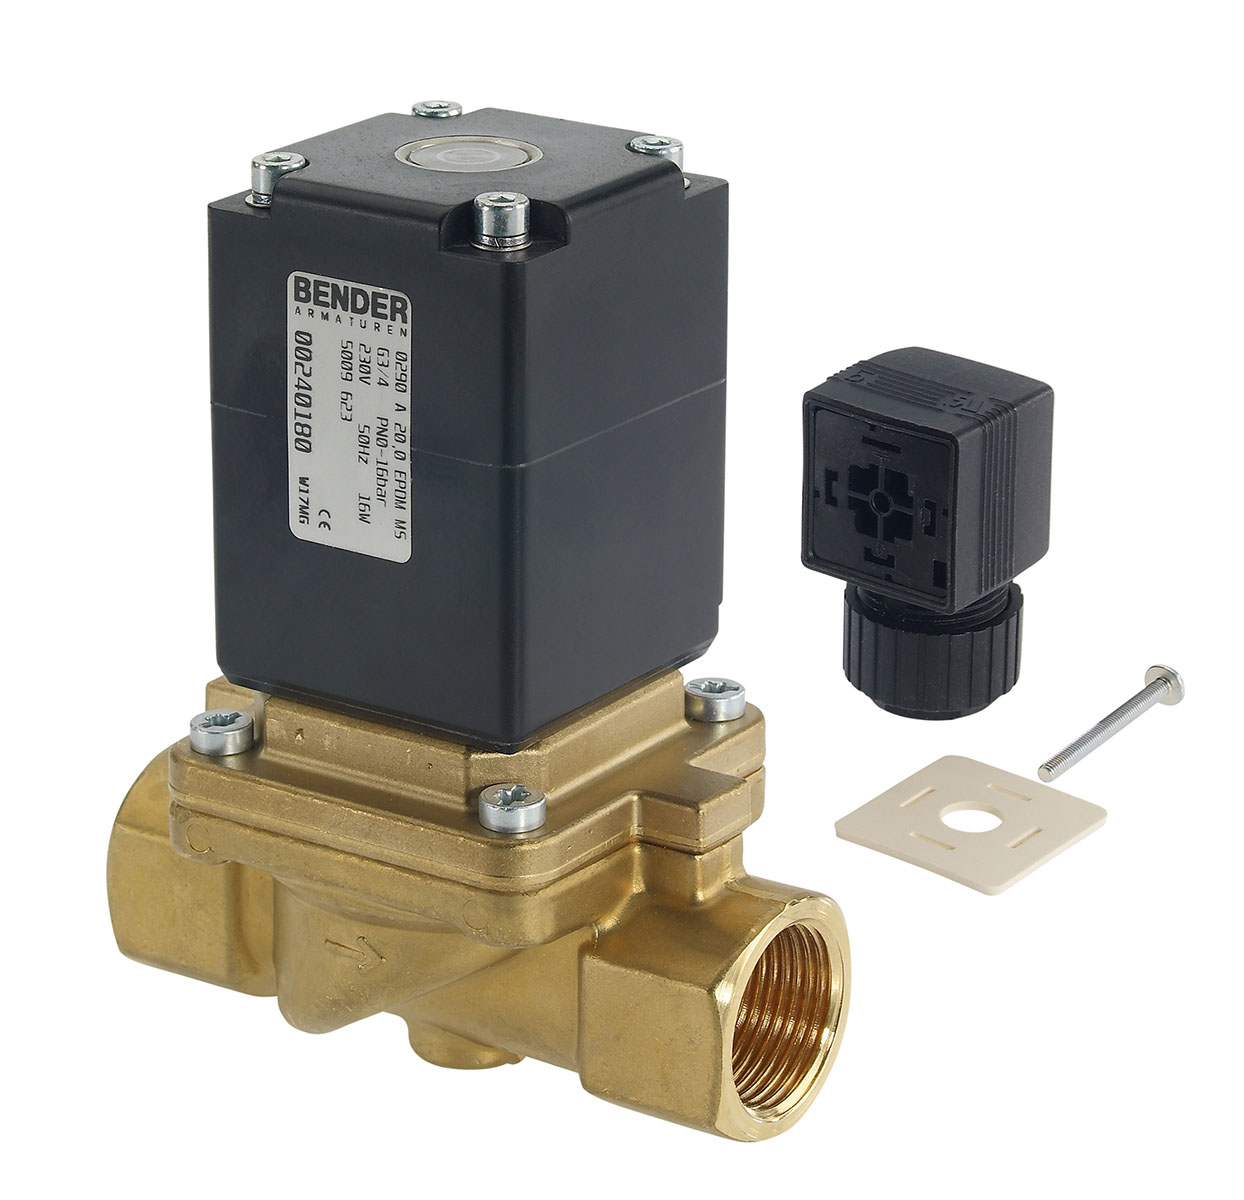 5009621 - 2/2 way solenoid valve normally closed for not flammable gas and fluids Type 6; female thread